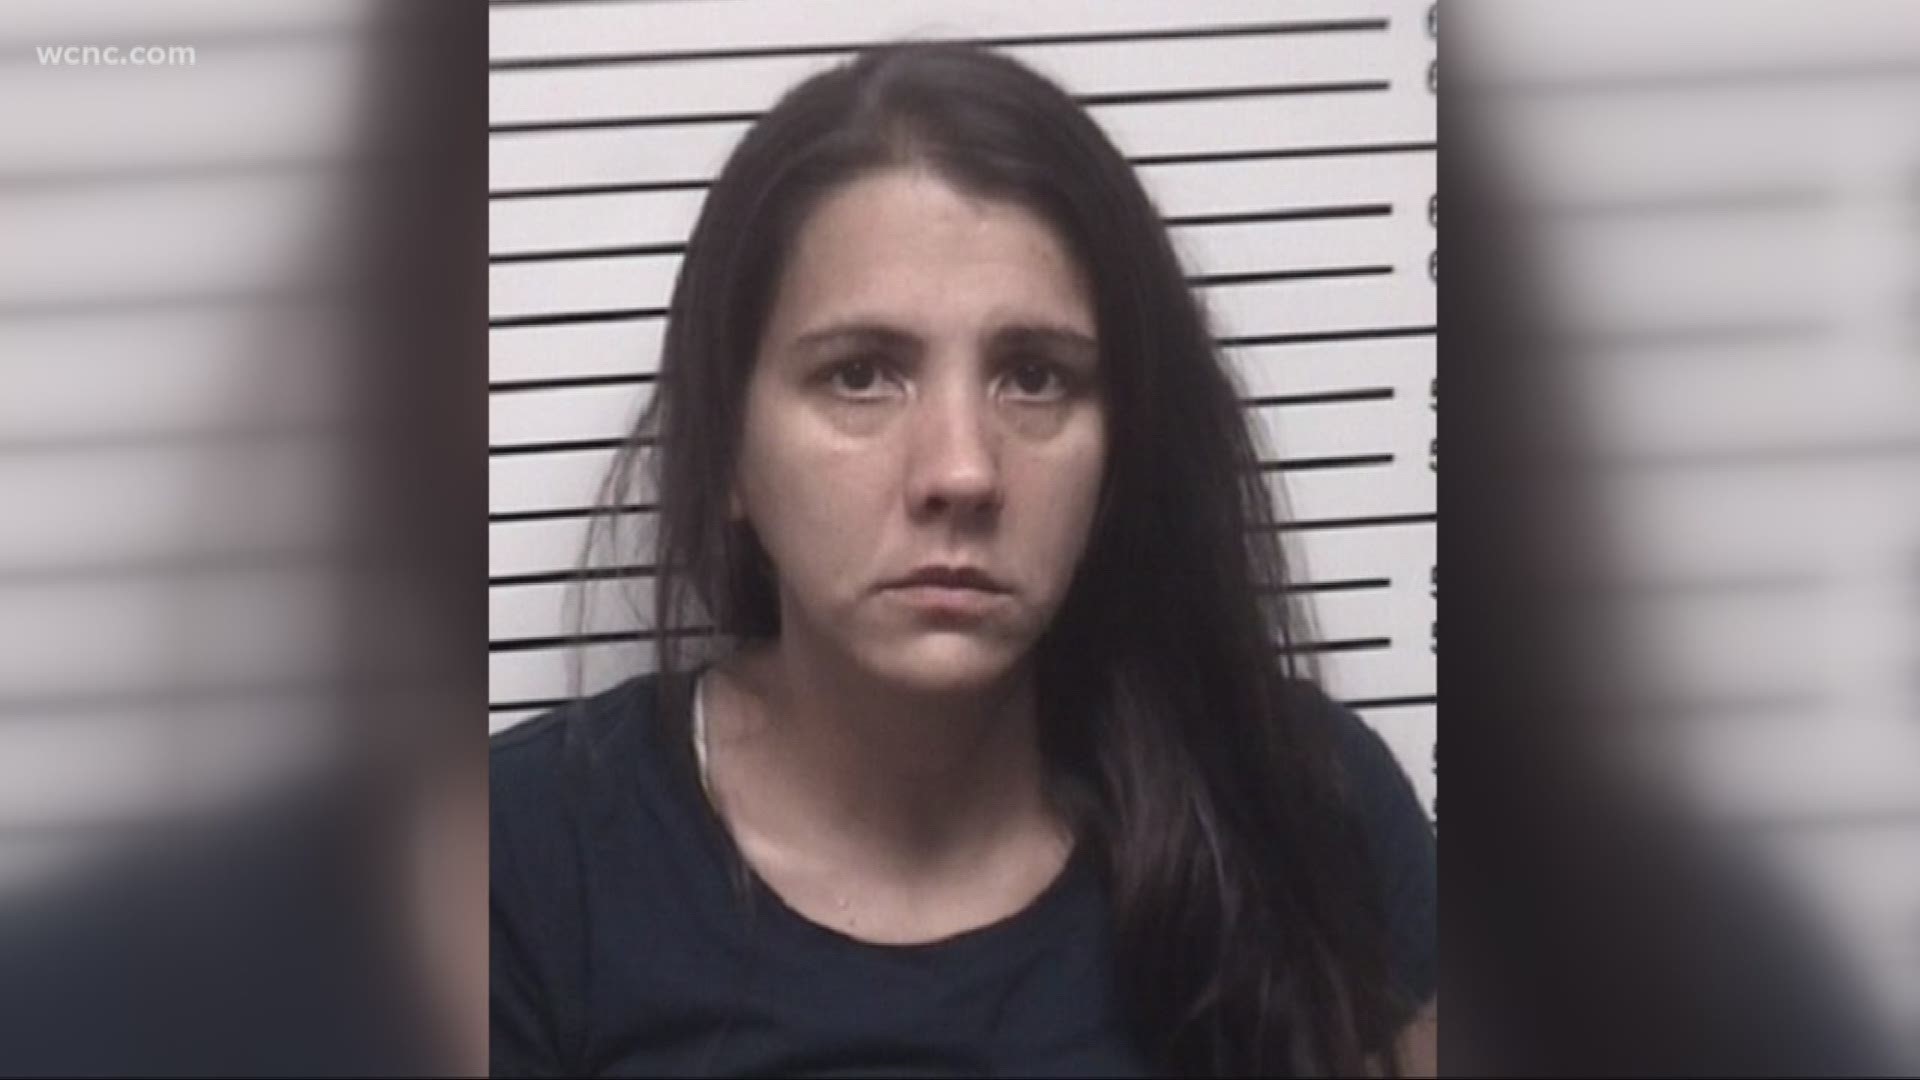 Erika Alta-Mirano was charged with 2nd-degree murder and child abuse. Detectives said the 4-month-old infant died from a serious head injury that they believed was not an accident.